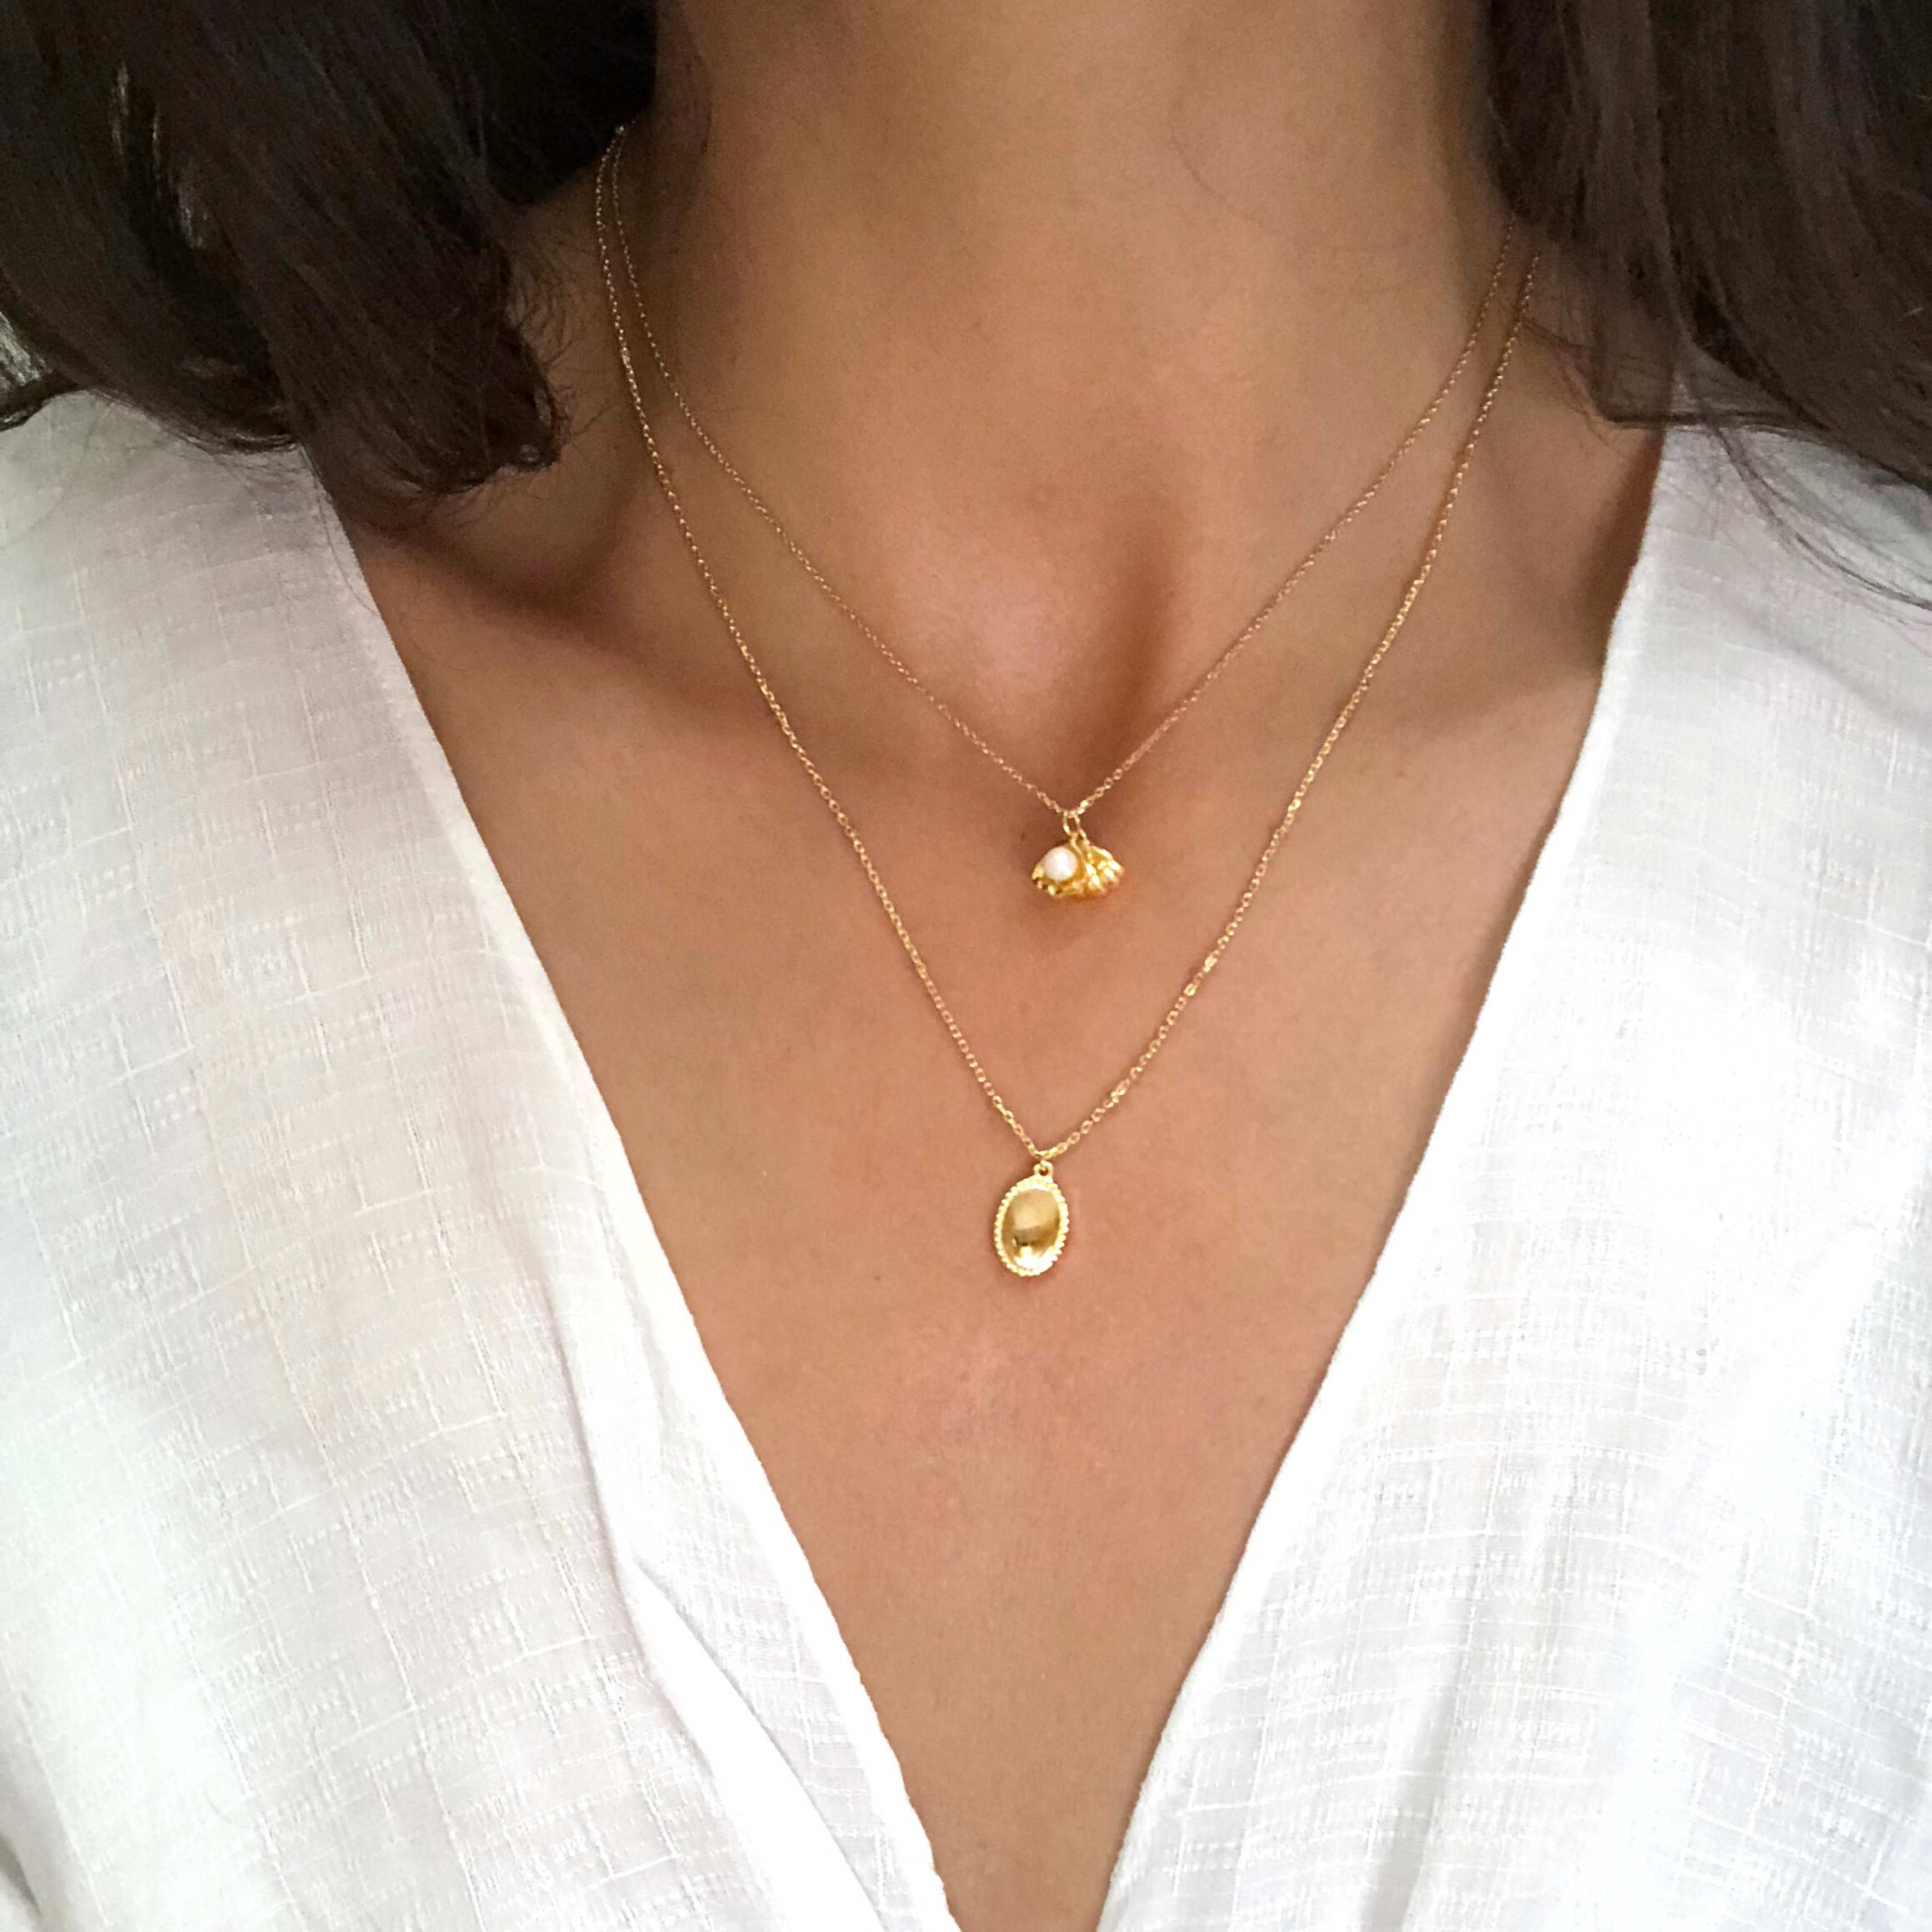 Chéri Necklace - Solid Gold